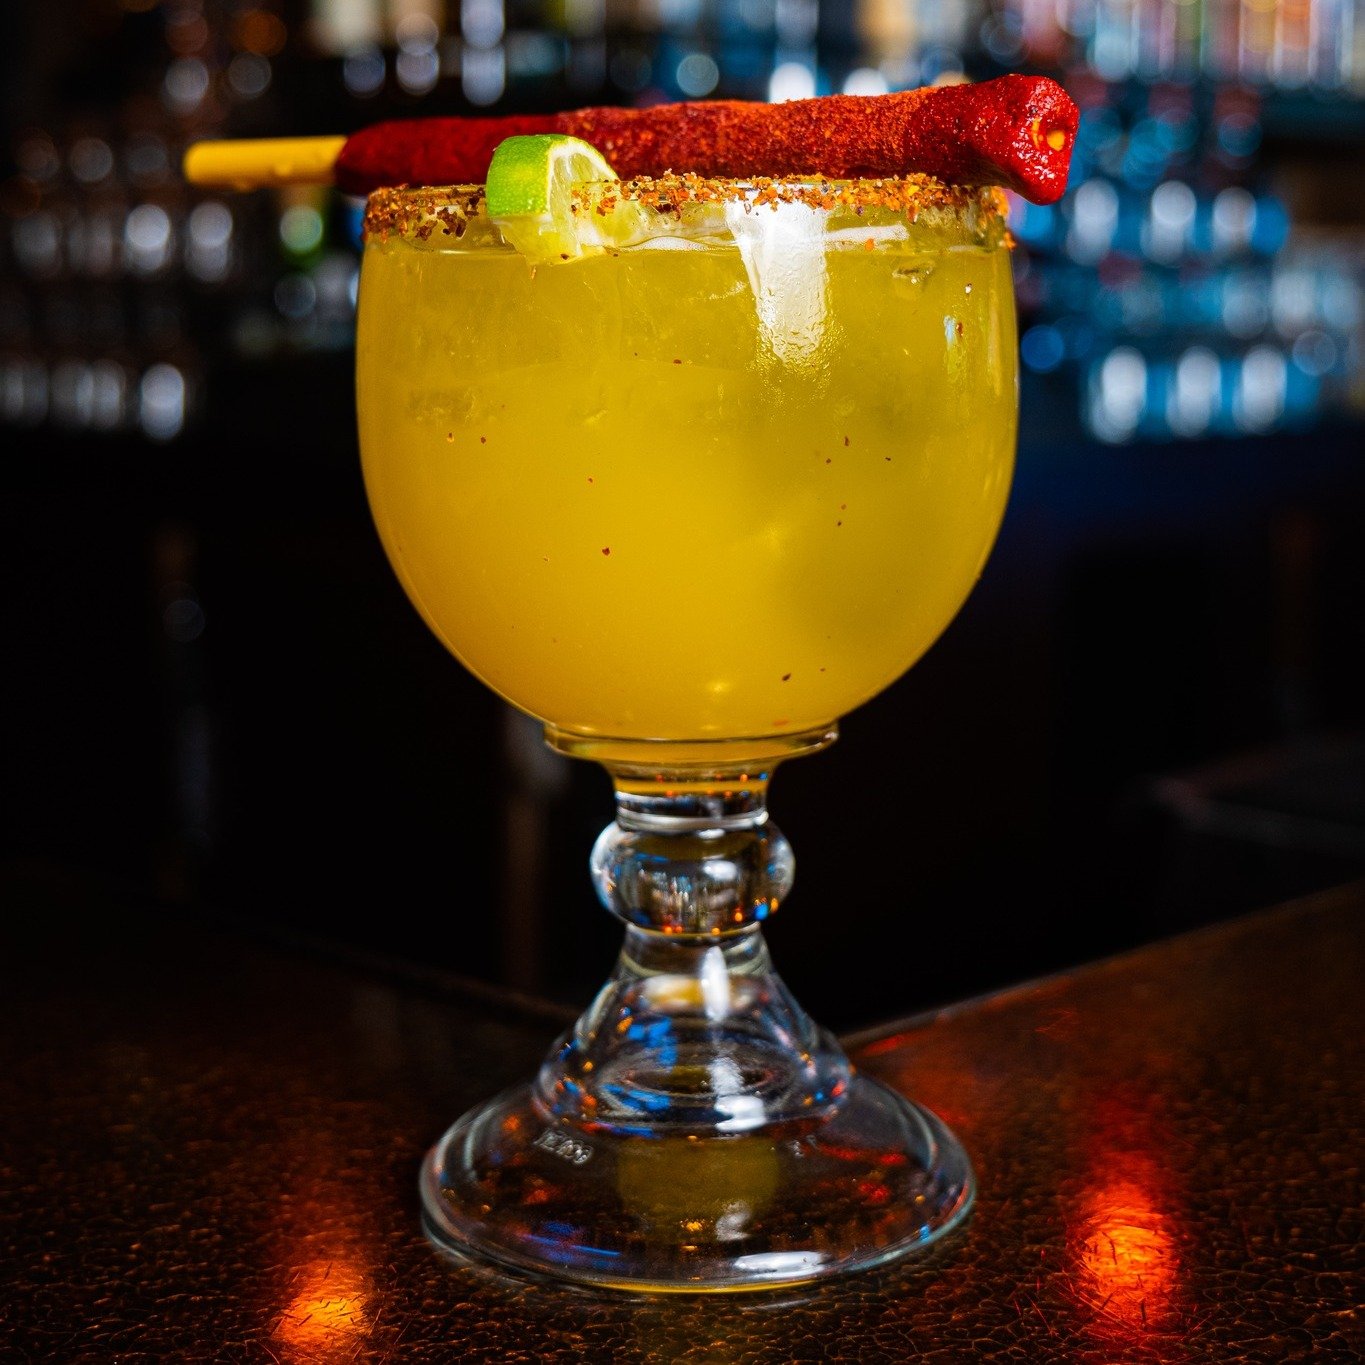 It's 5 o'clock on #thirstythursday what are ya drinking? 🍹 If you're slinging drinks, do they look good enough to get off social media and into your establishment? If not, let's chat.

#moyerproductionco #productphotographer #productphotography #dri